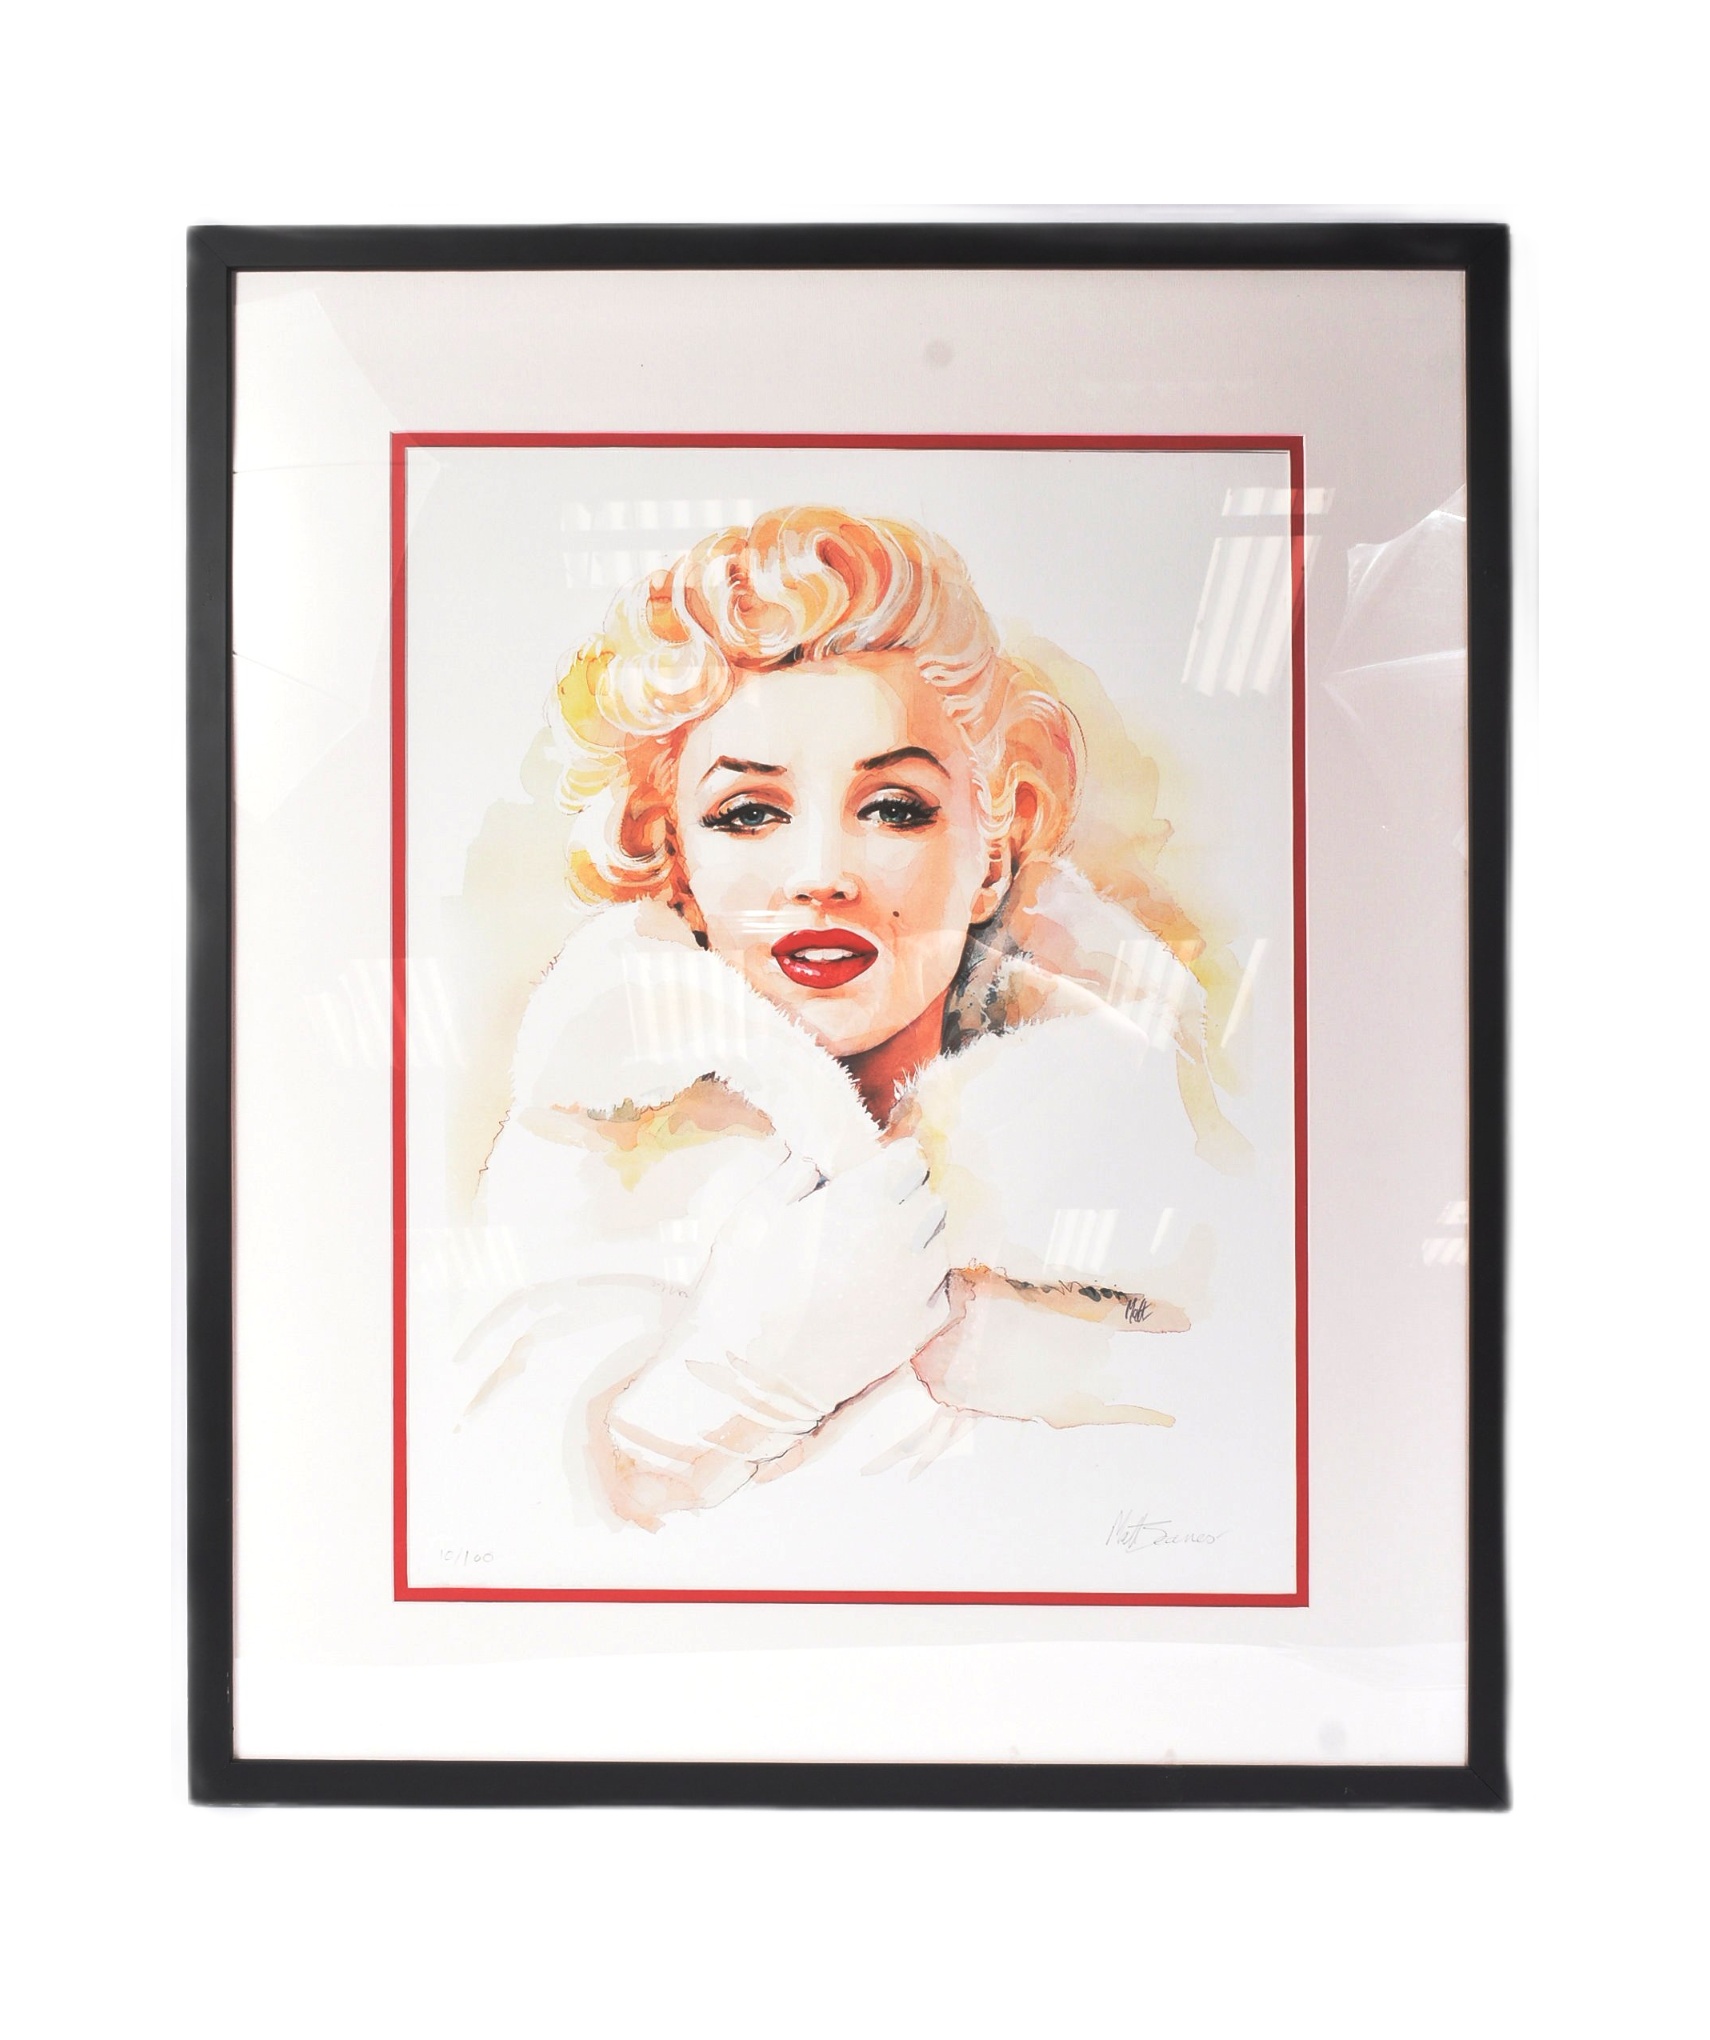 'MARILYN IN WHITE MINK' - MATTHEW JEANES - LIMITED EDITION GICLEE PRINT